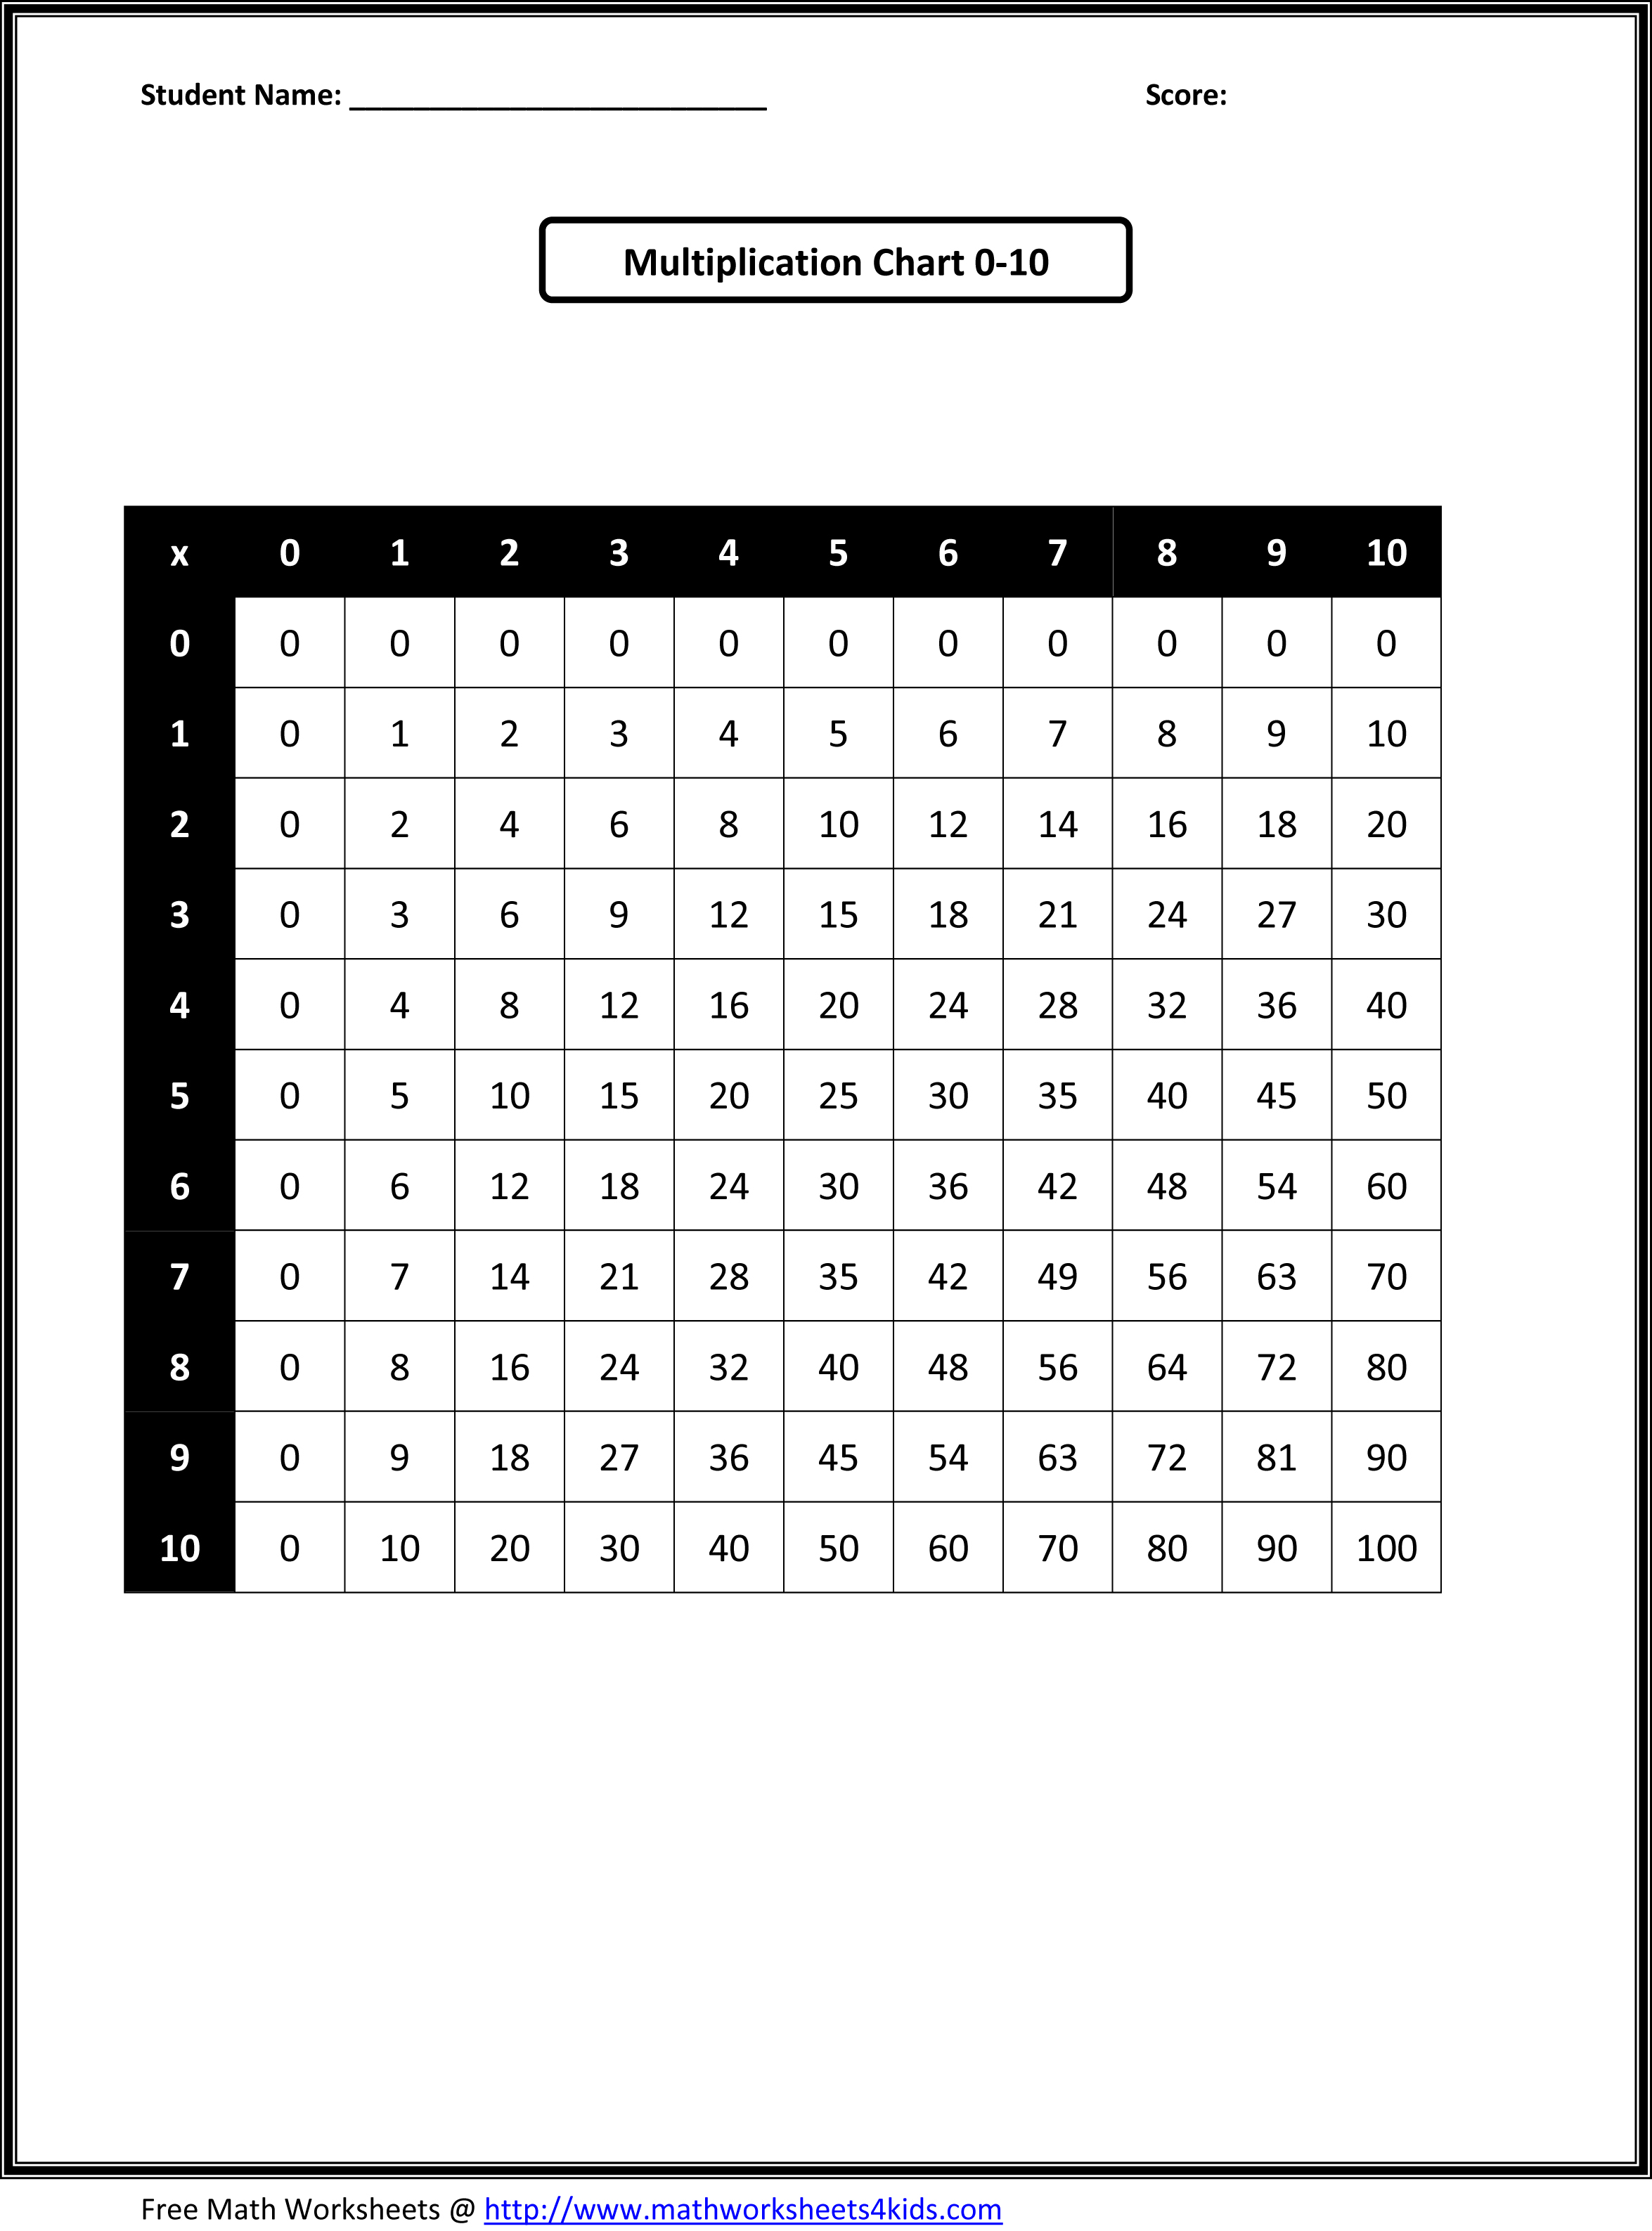 8 Best Images of Square Root Worksheets Printable - Cube ...